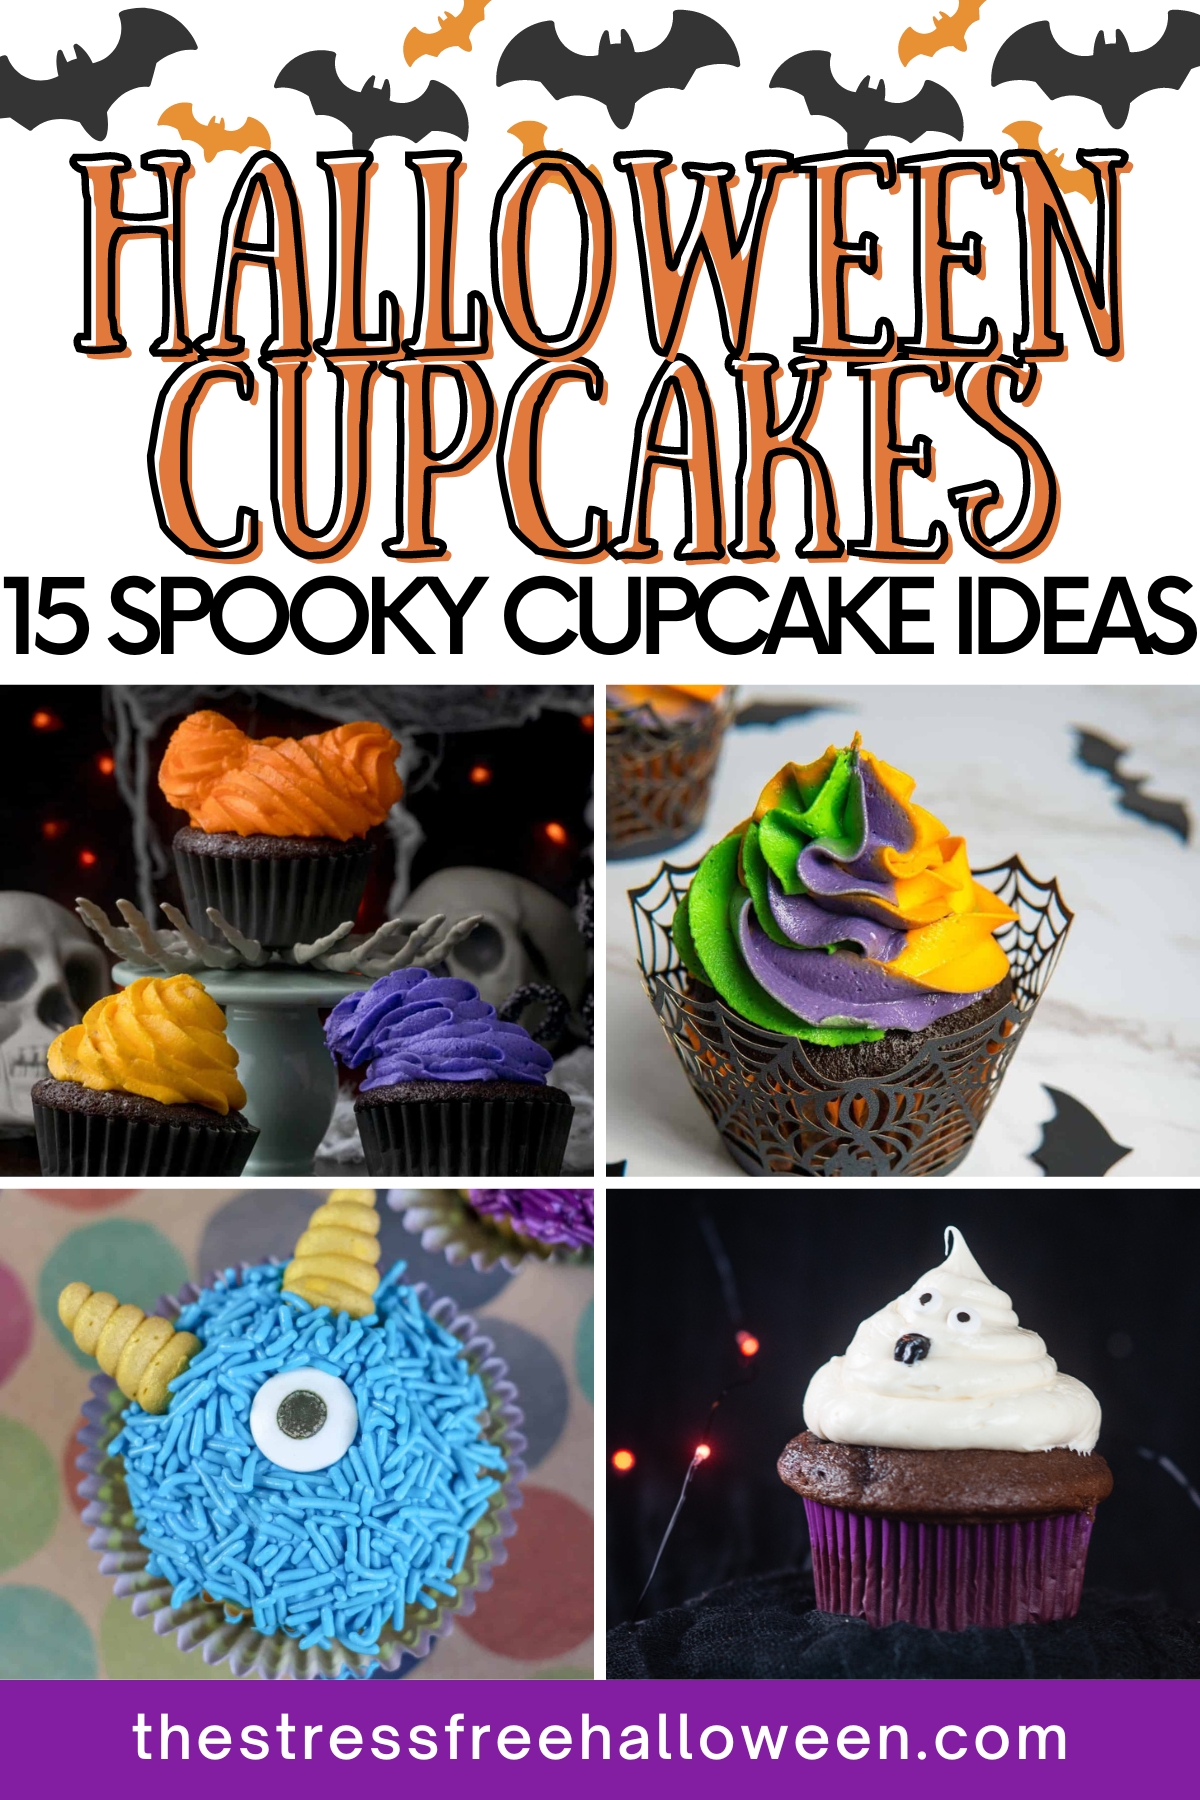 collage of Halloween cupcakes, hocus pocus cupcakes, green, purple, and orange cupcake, Halloween unicorn cupcake, and ghost cupcake, with text overlay Halloween cupcakes 15 spook cupcake ideas.